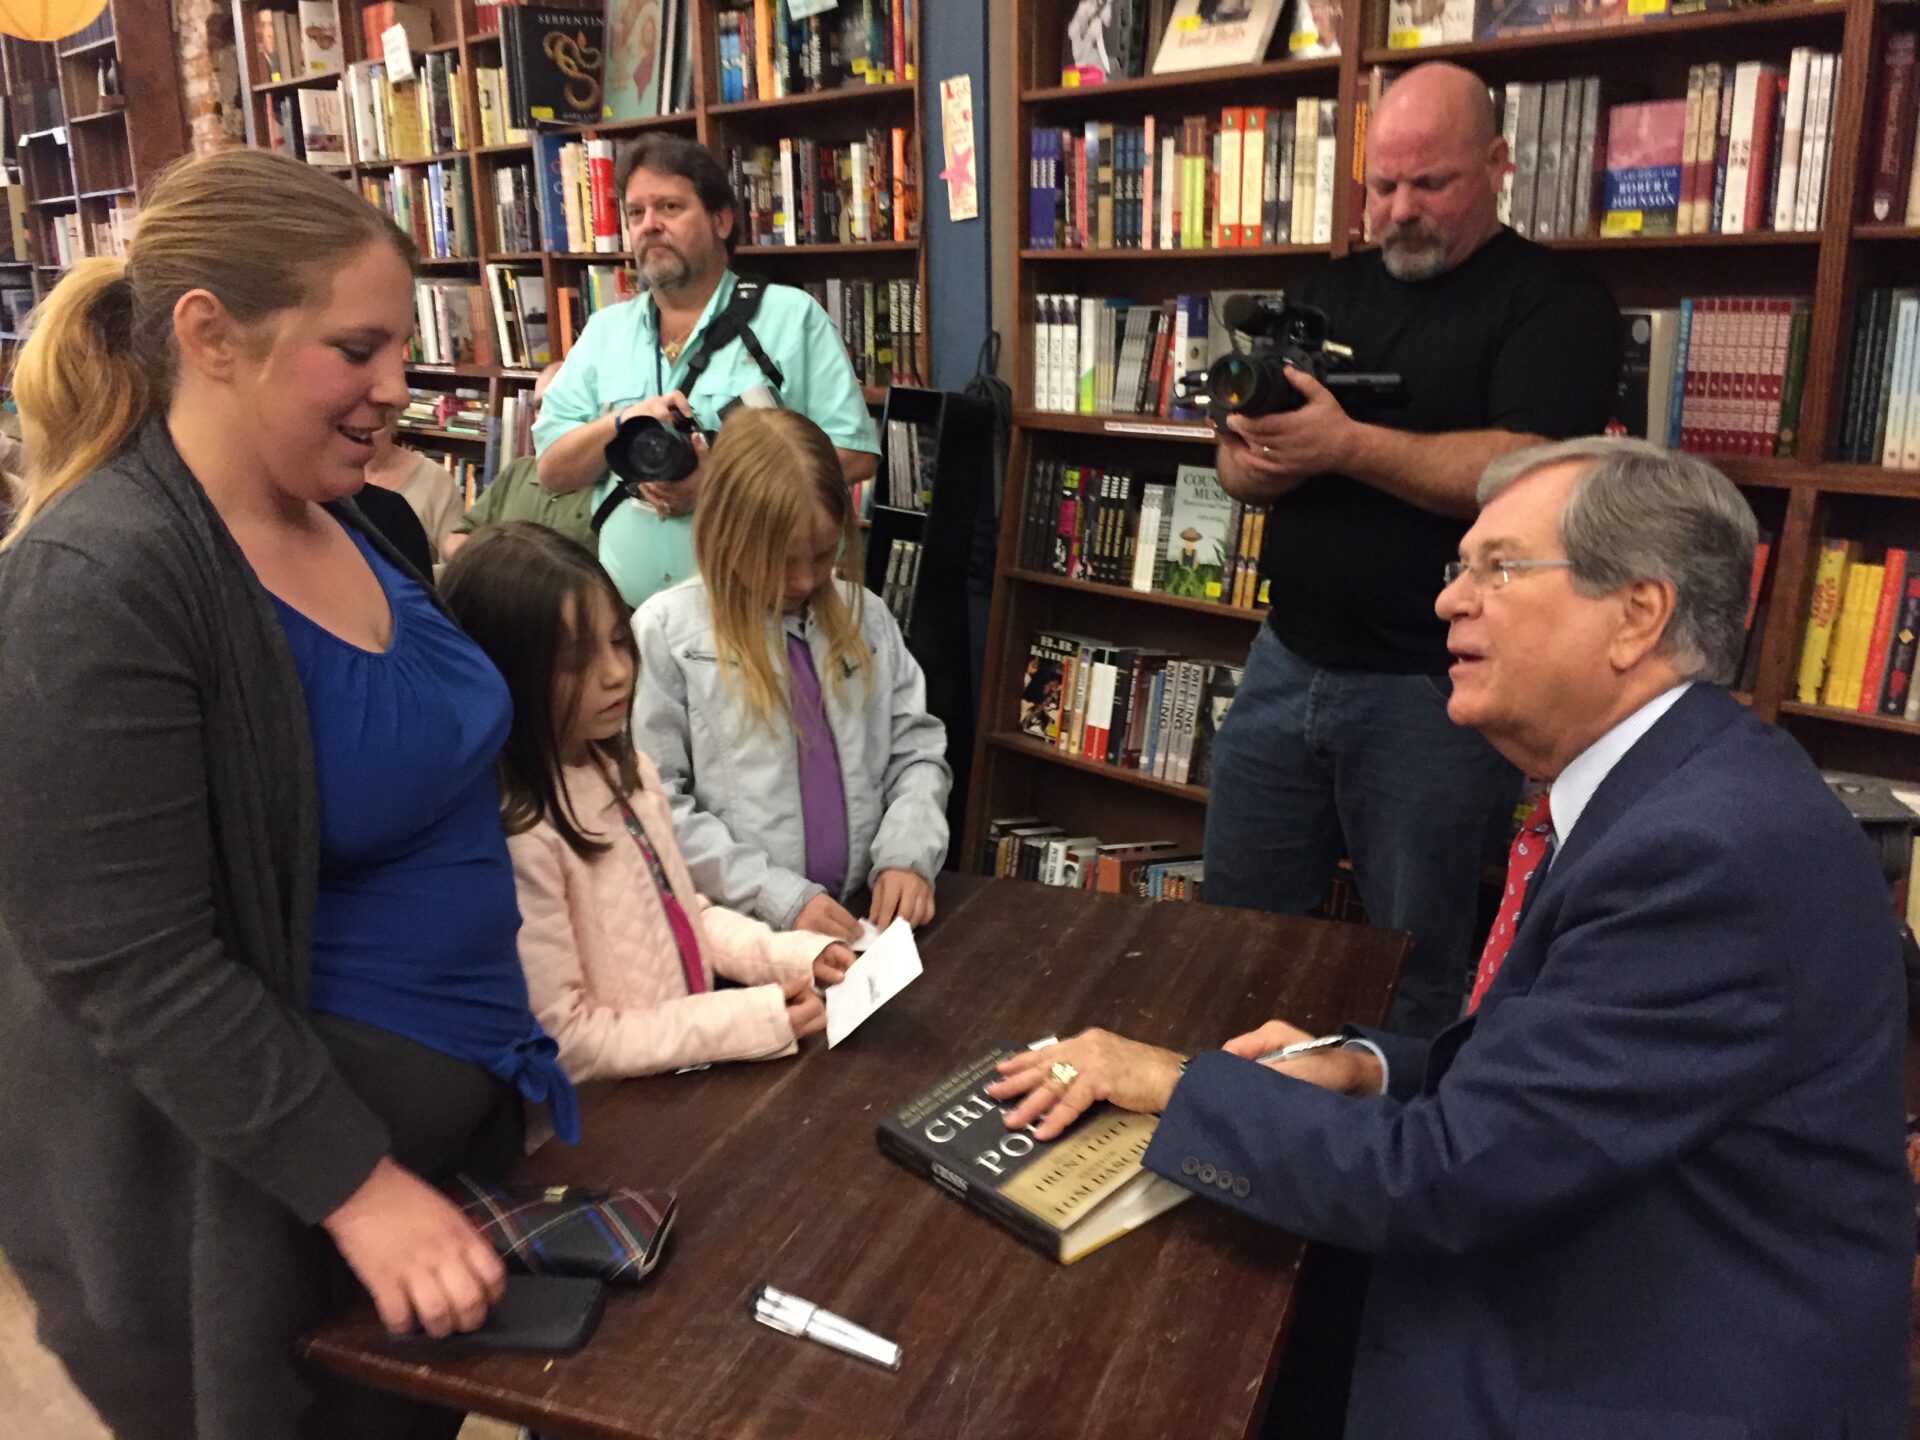 Sen. Lott is friendly as he greets Oxonians at the book signing. 